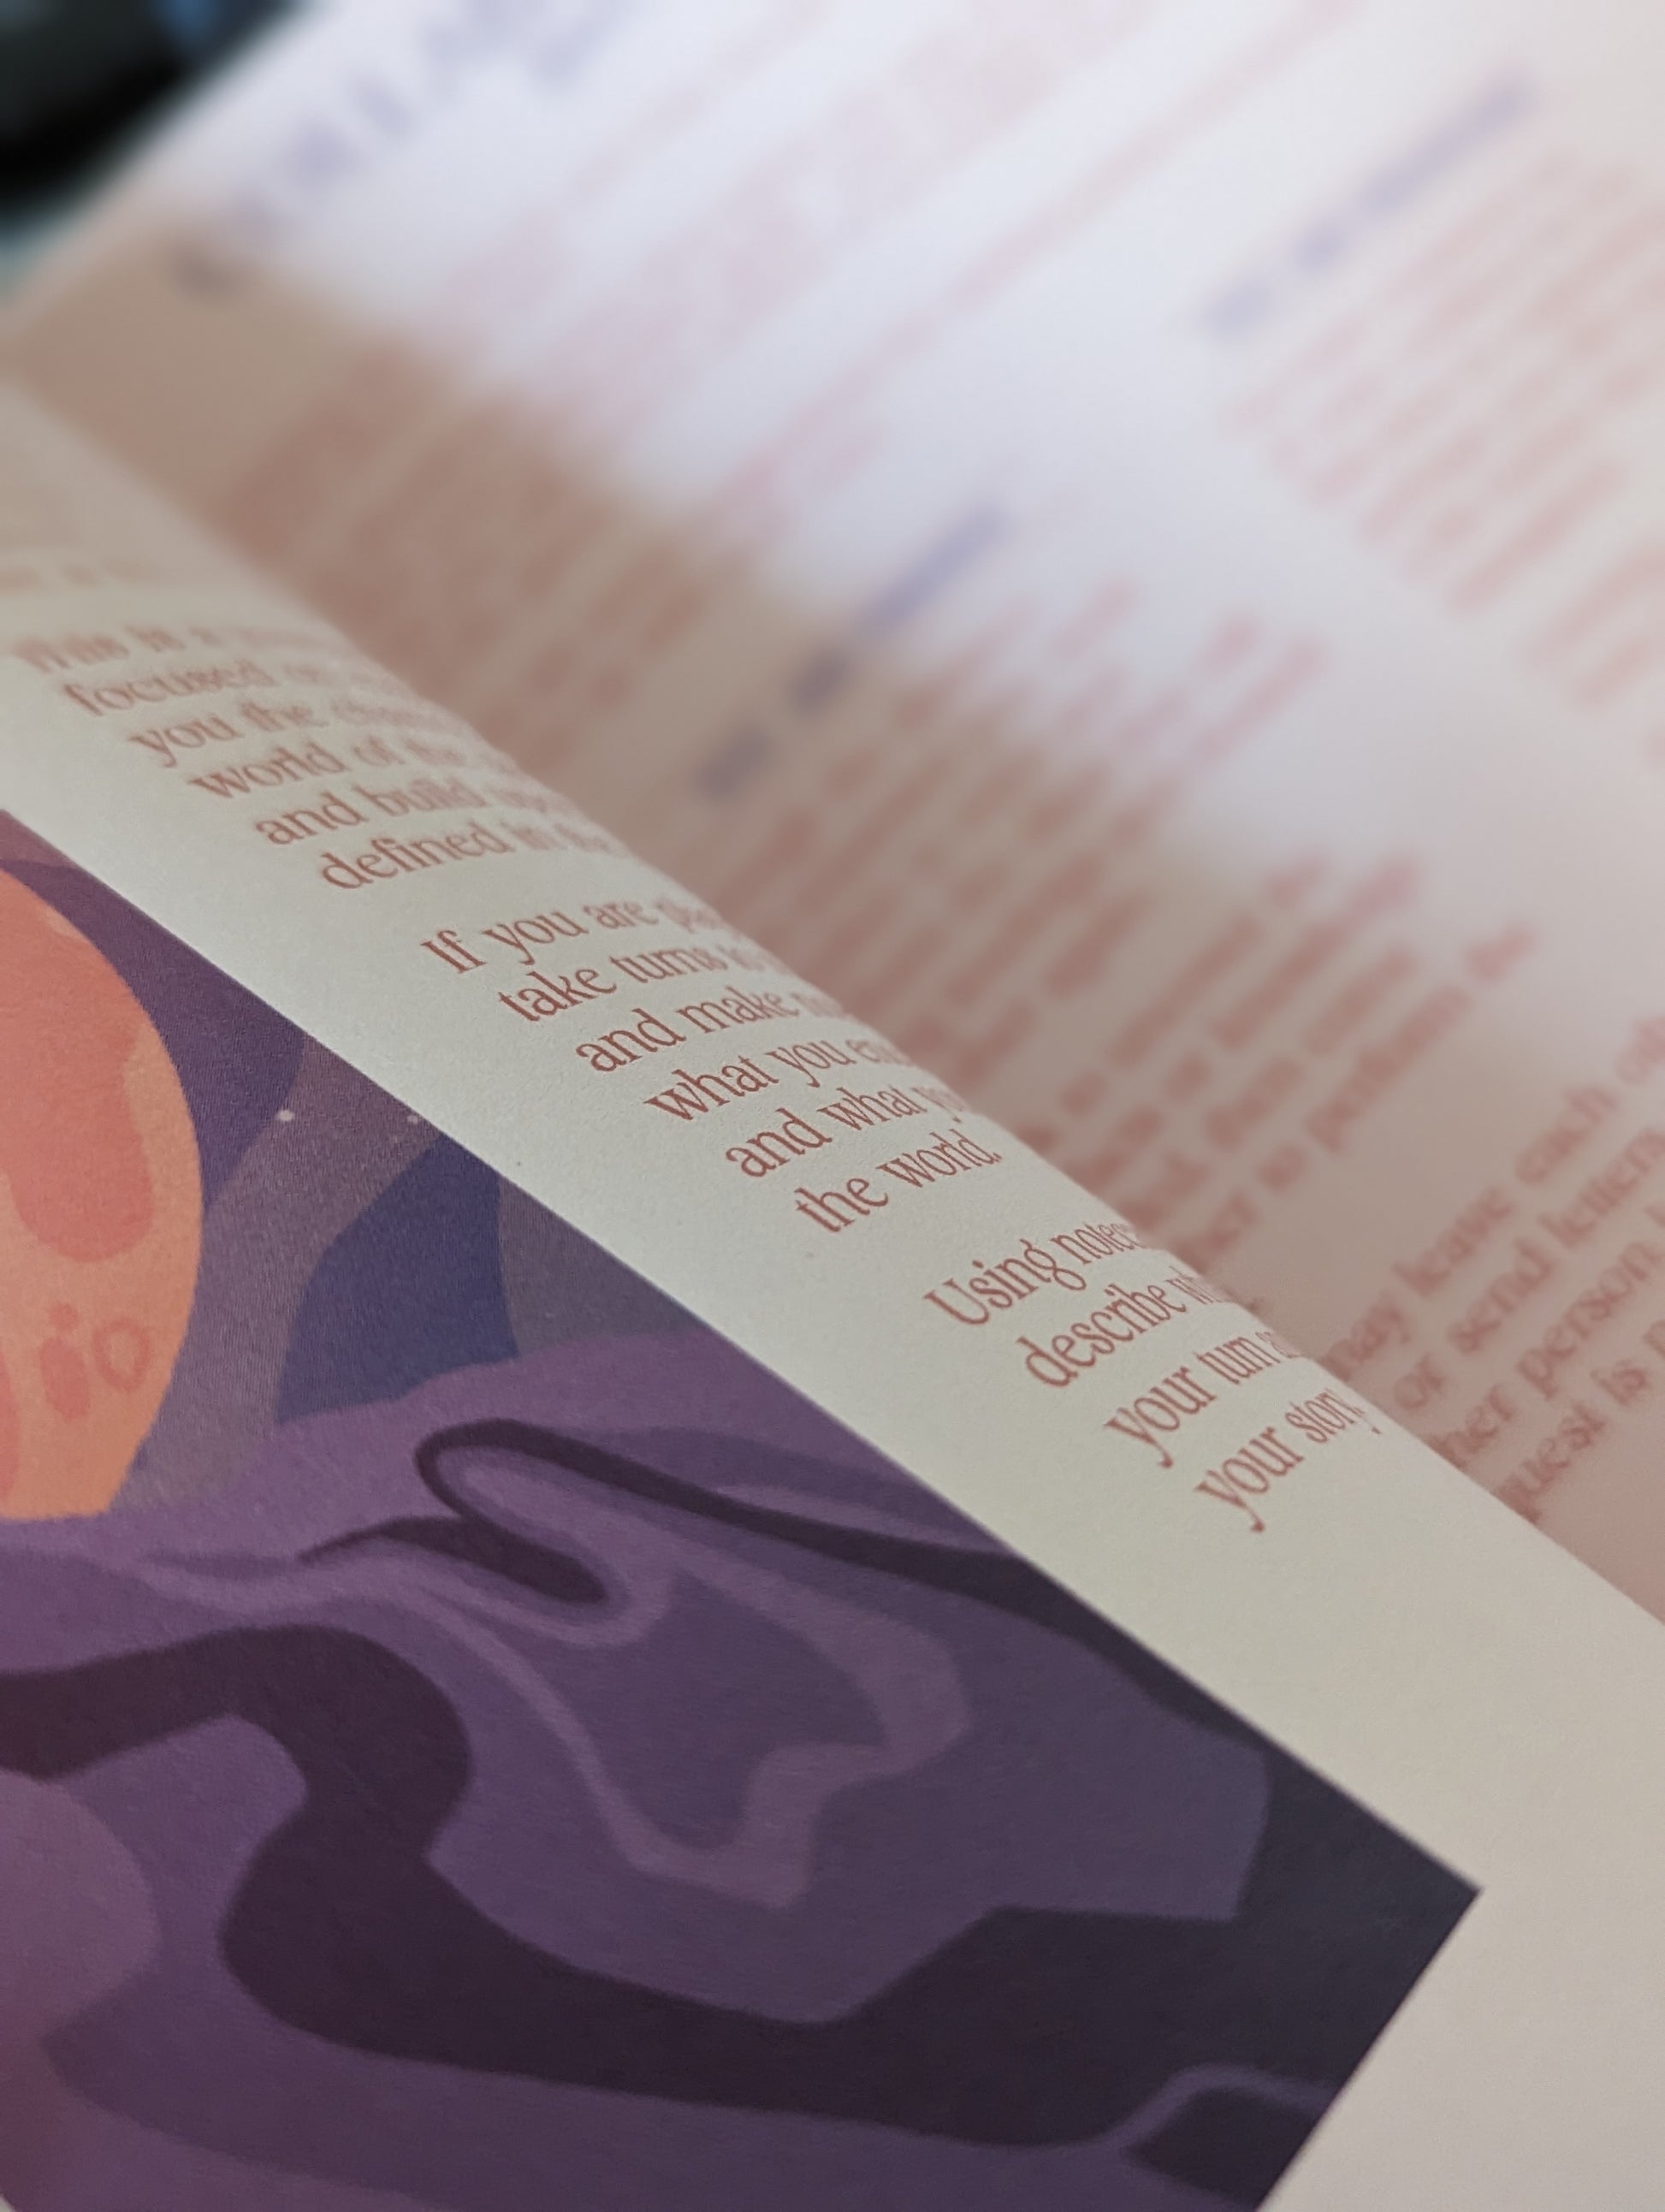 A heavily cropped closeup of 2 of the pages from inside the After Glow book